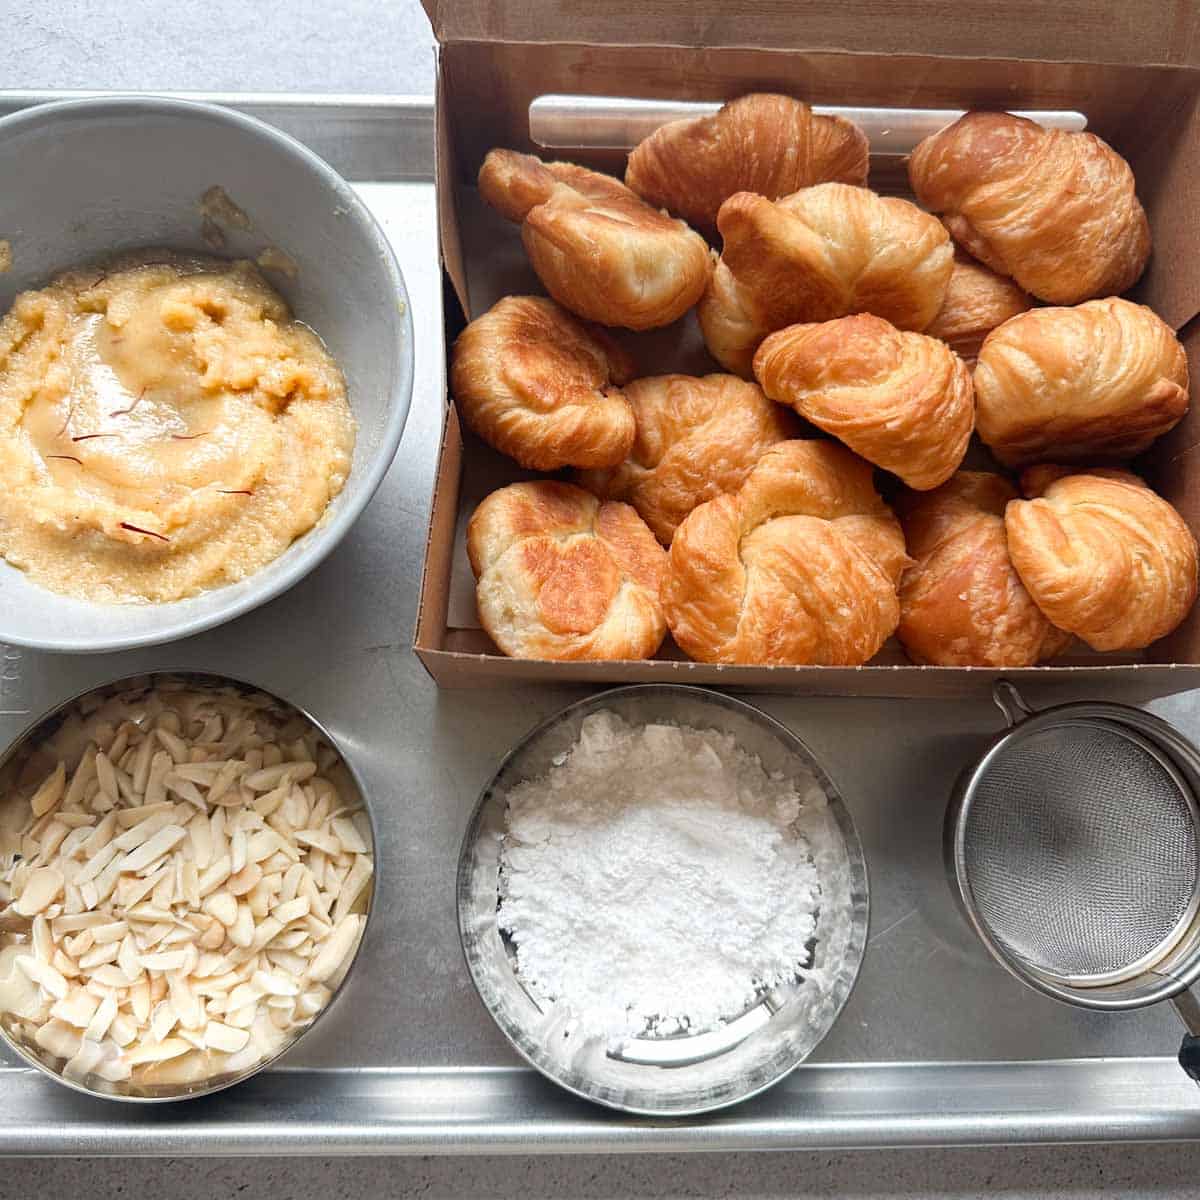 Ingredients for badam halwa croissants on a sheet tray. It includes slivered almonds, badam halwa, powdered sugar, and mini croissants.